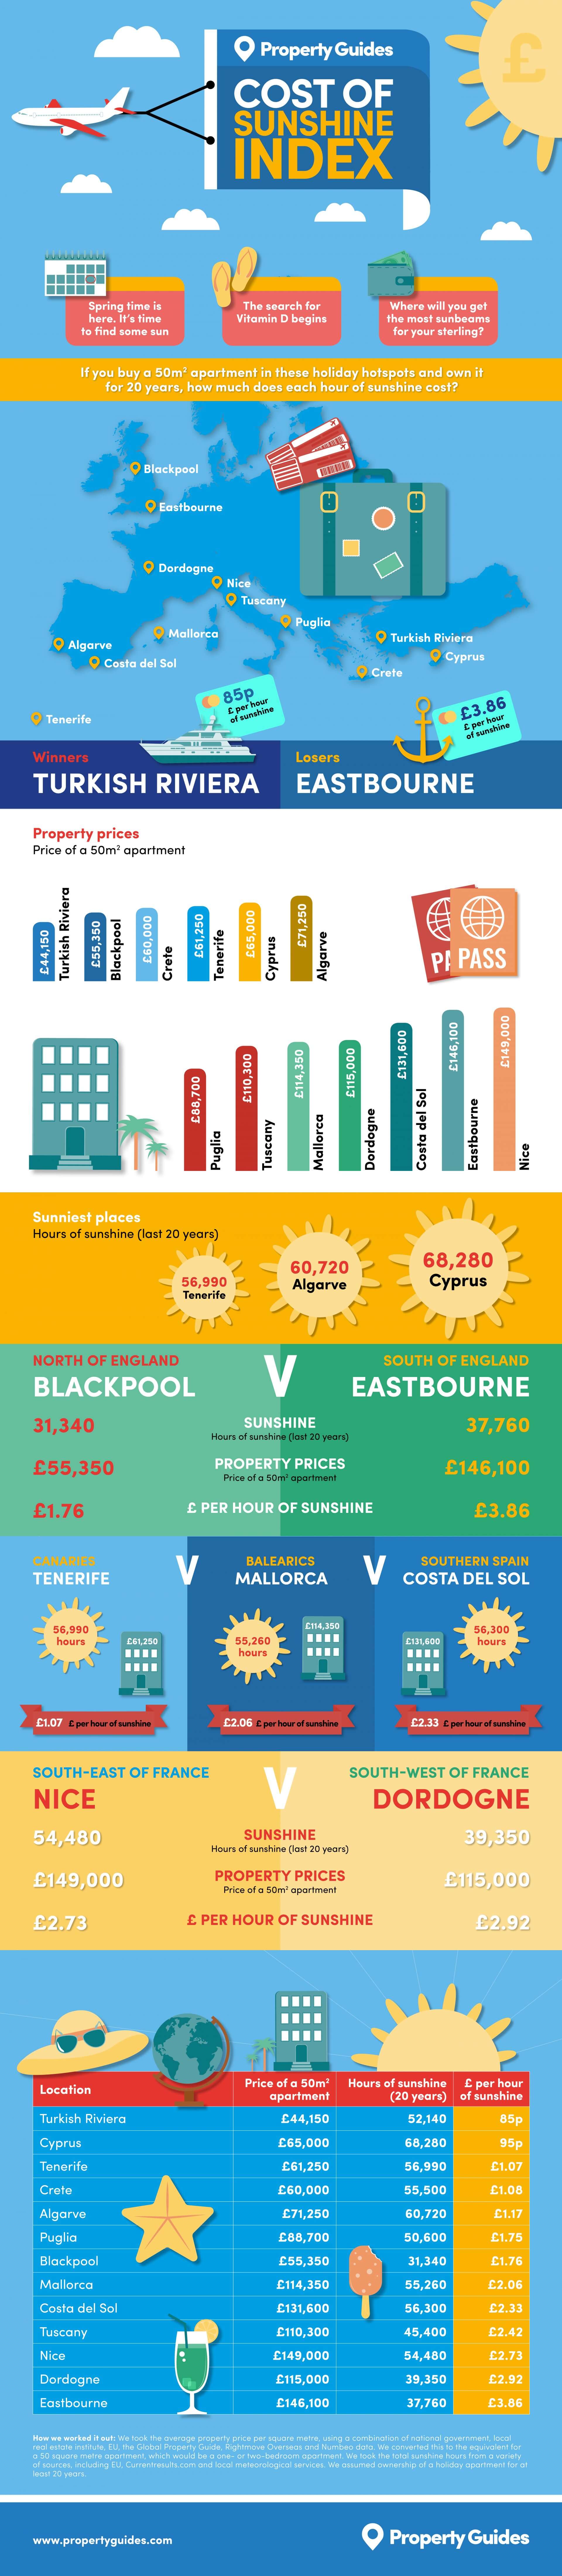 Cost of sunshine index infographic